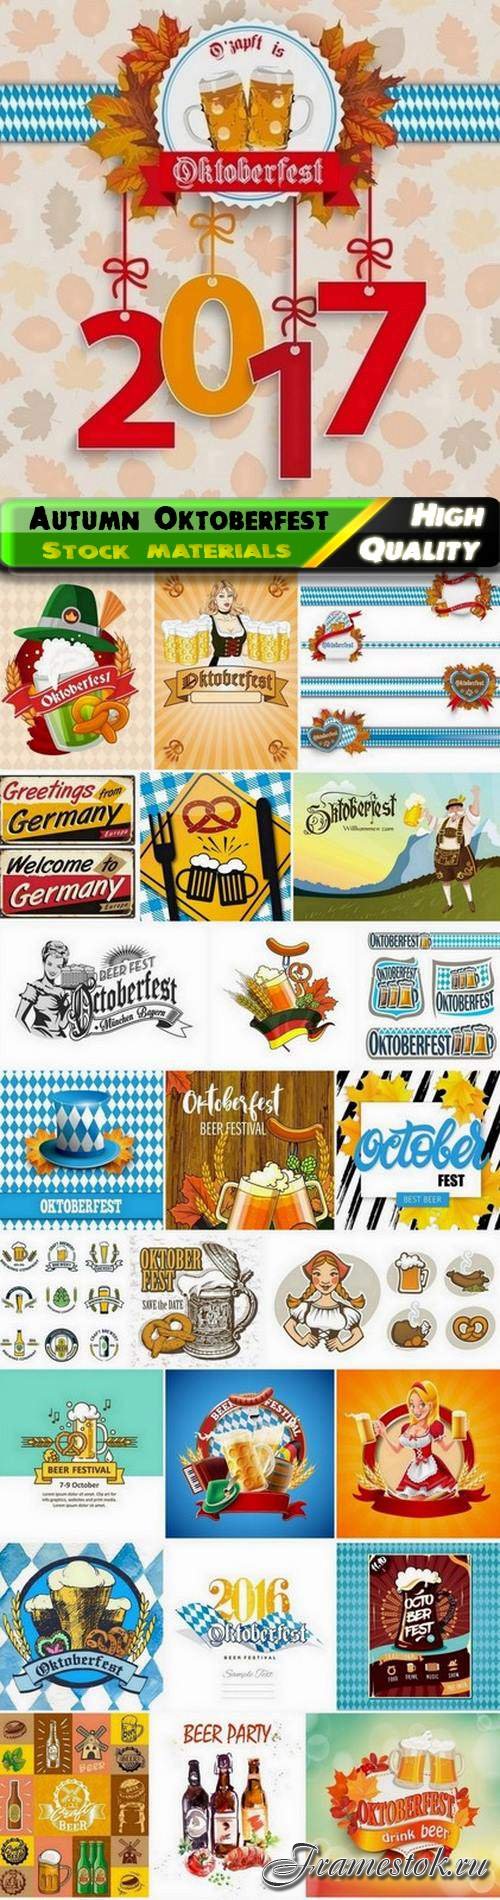 Autumn German Oktoberfest with beer mugs and bottles 2 - 25 Eps